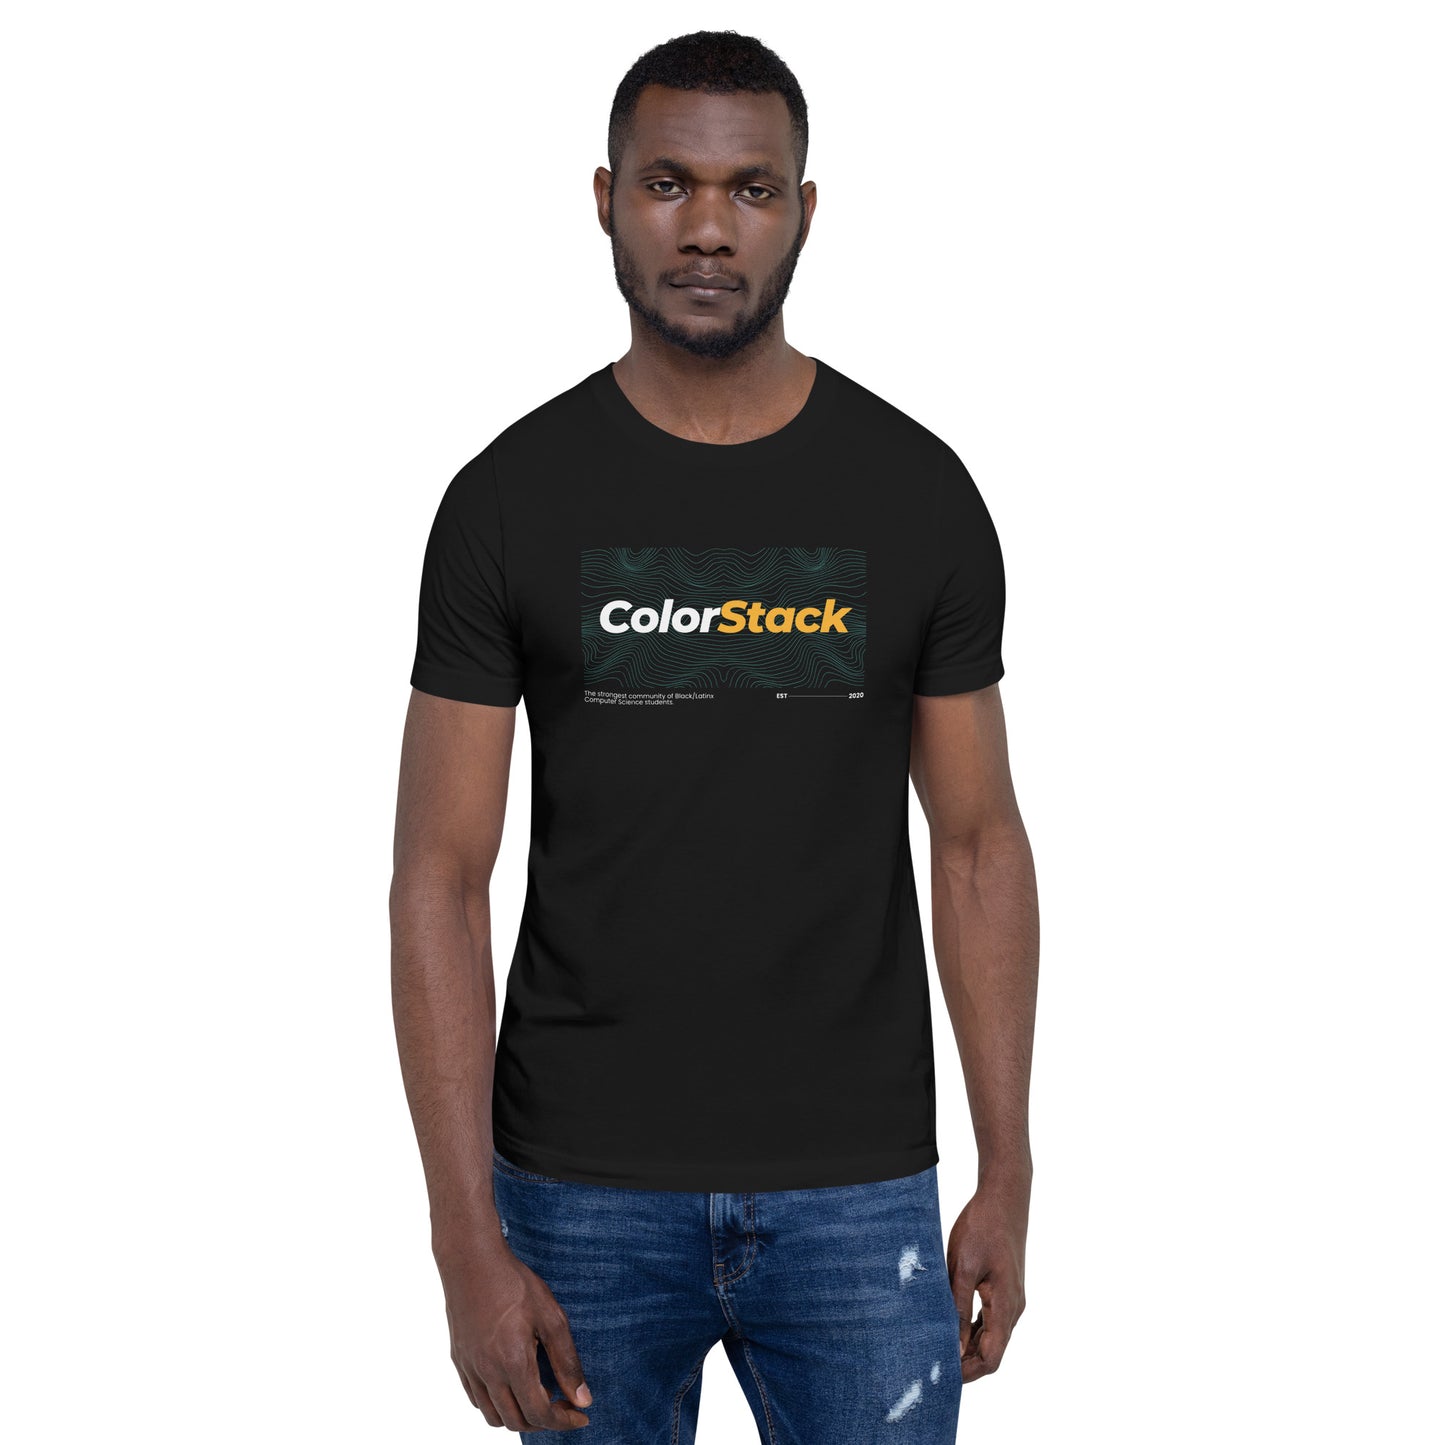 Rep ColorStack Tee